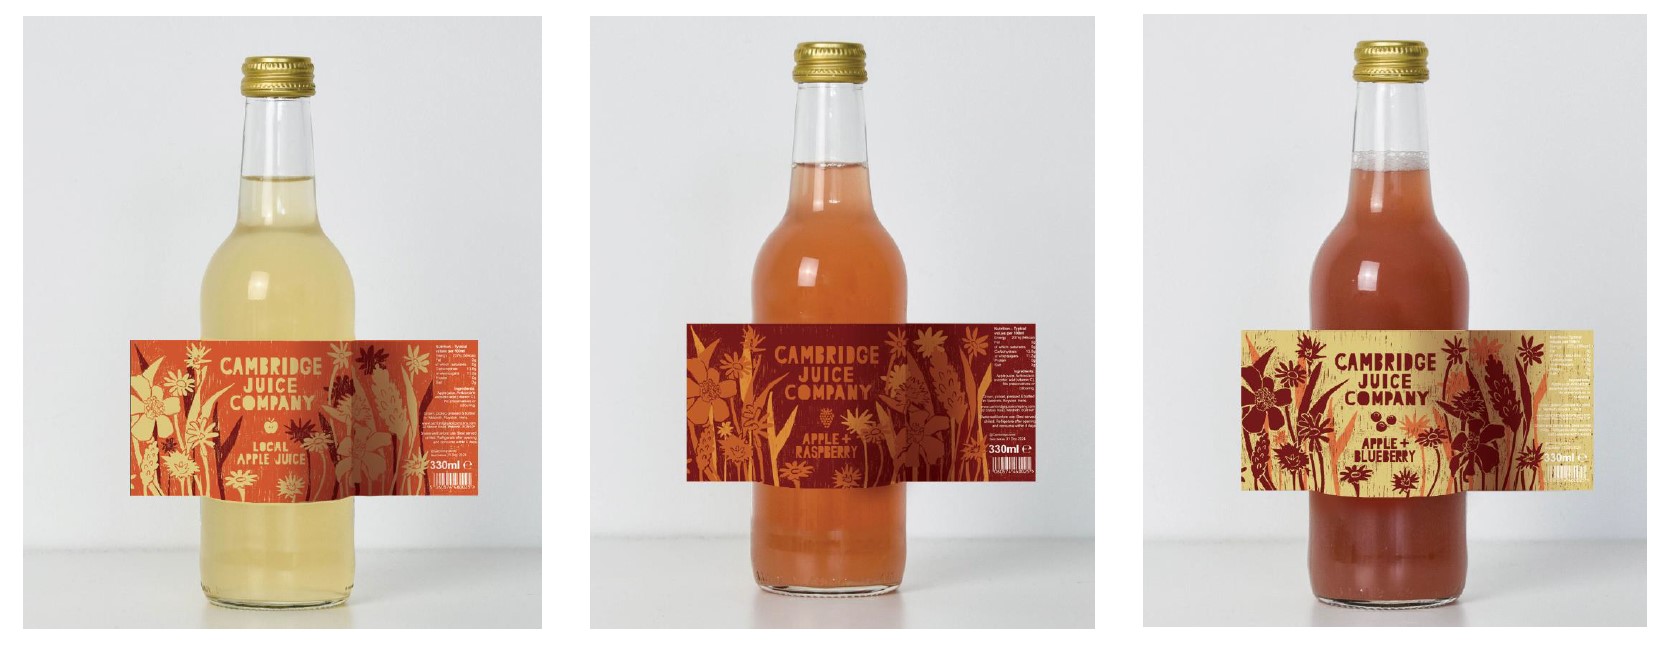 Three photos of bottles with different label designs